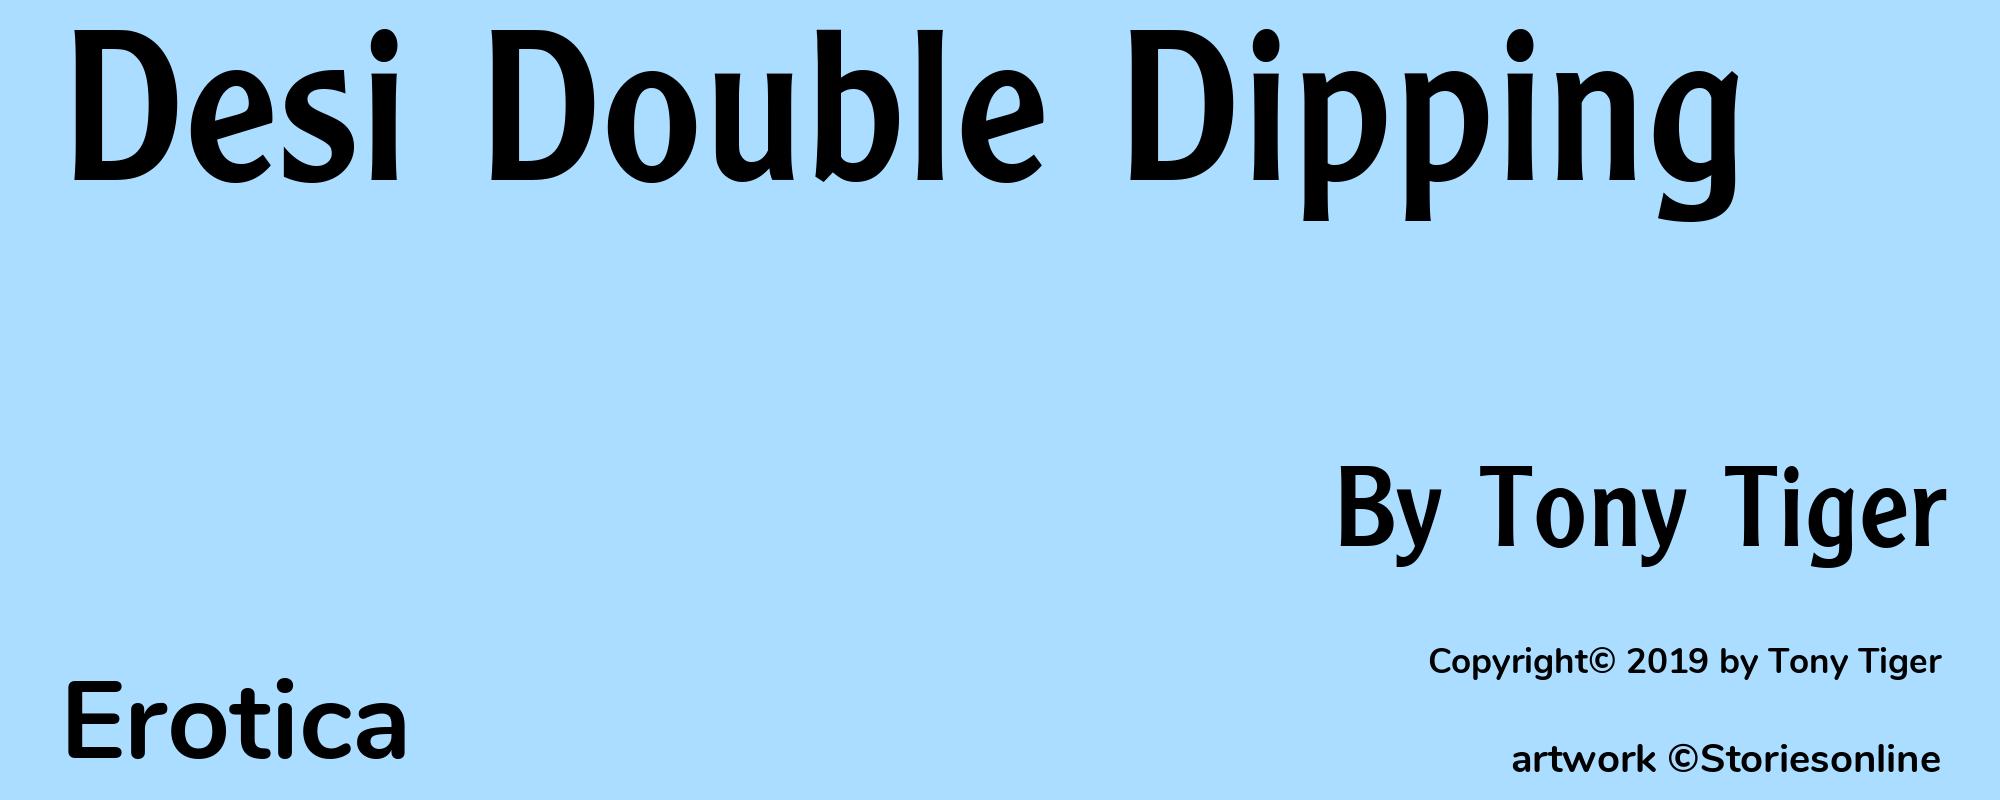 Desi Double Dipping - Cover